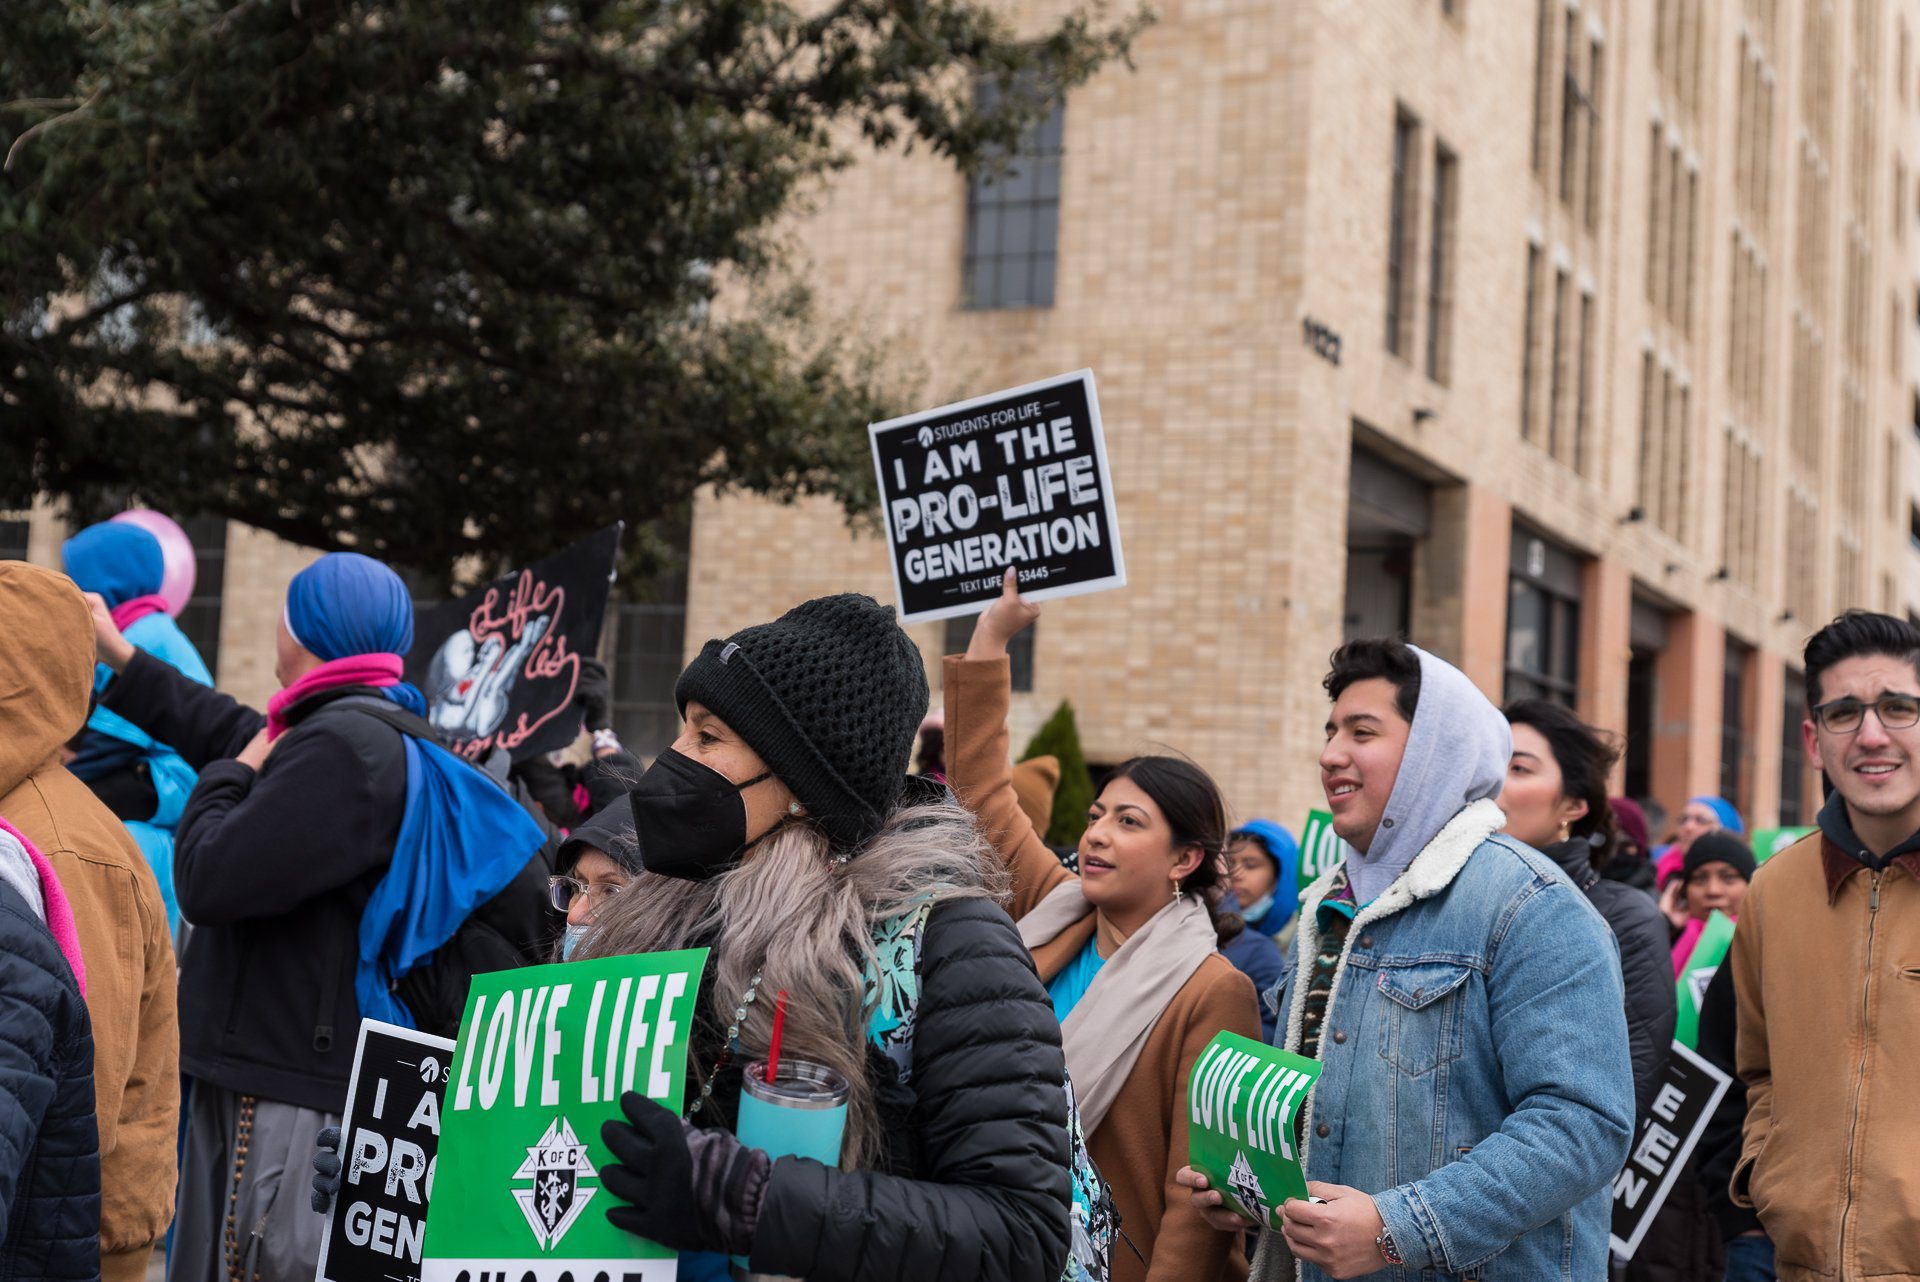 North Texas March for Life Rally Draws Nearly 3,000